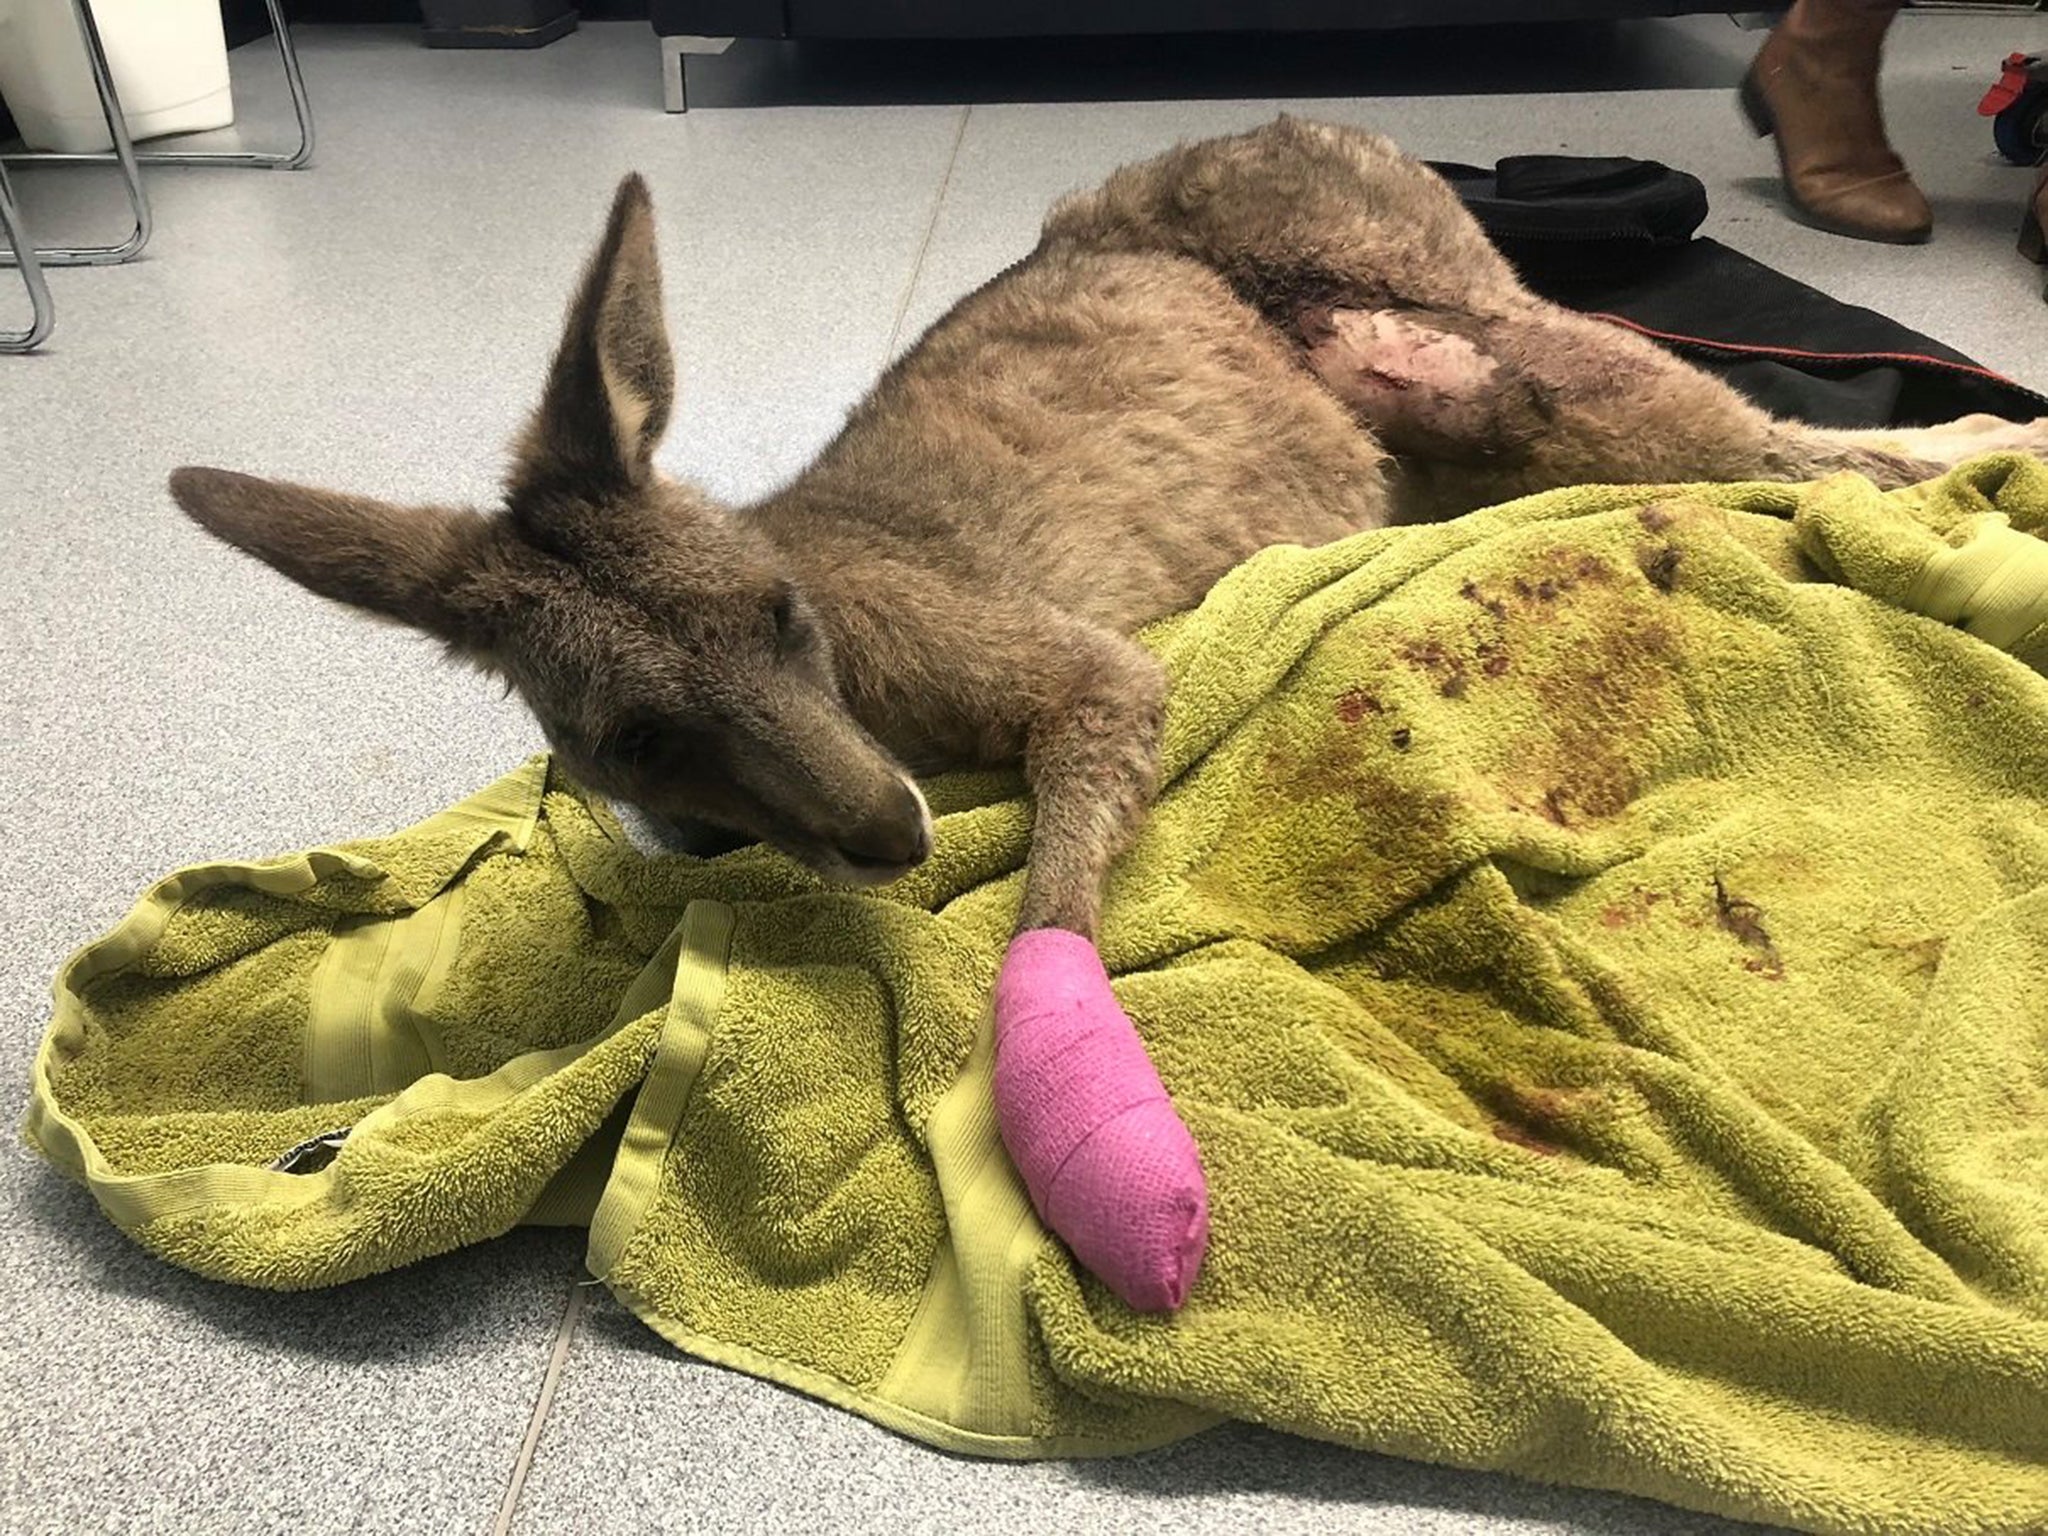 The kangaroo was treated for its wounds and is now recovering in an animal shelter